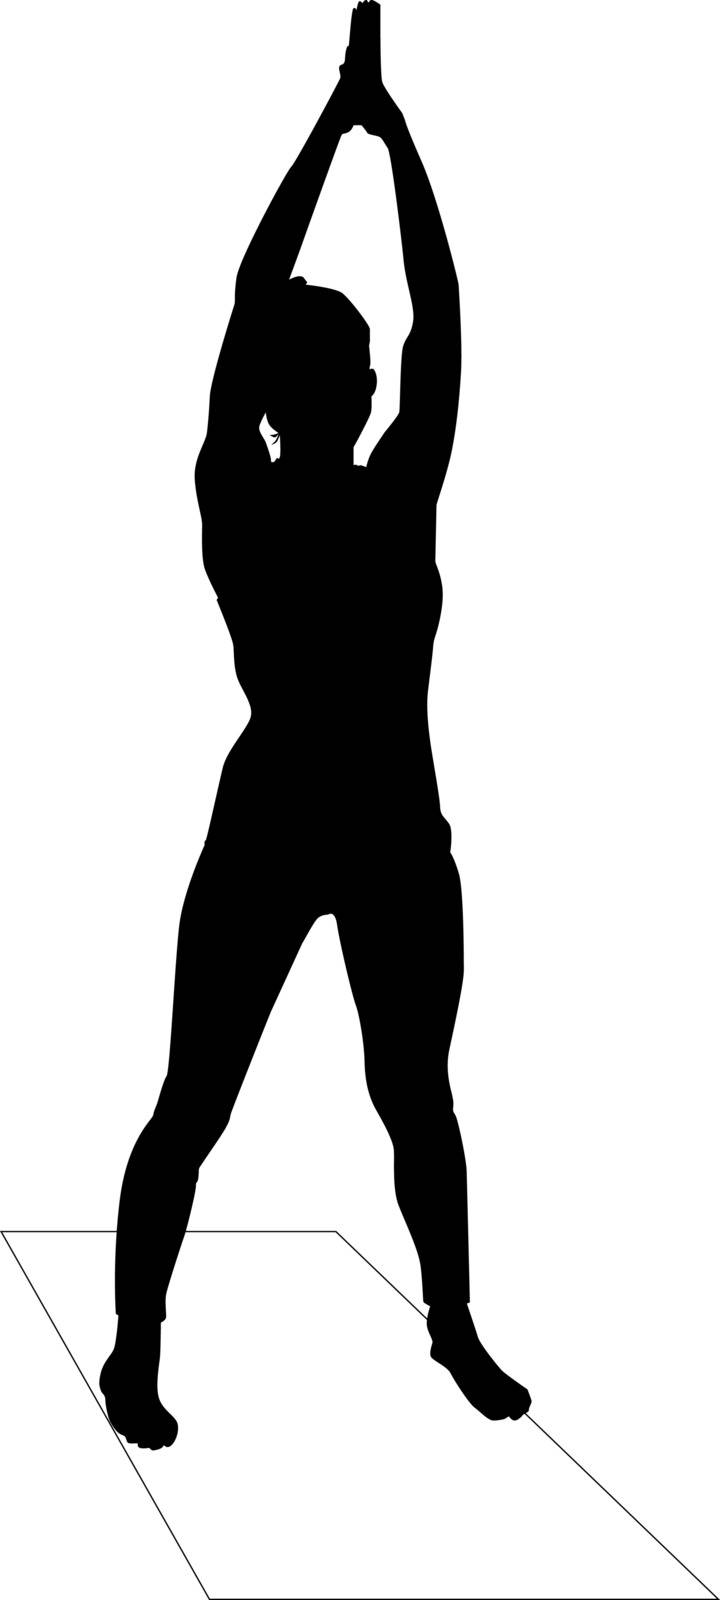 Silhouette of a woman doing yoga, illustration, vector on white background.